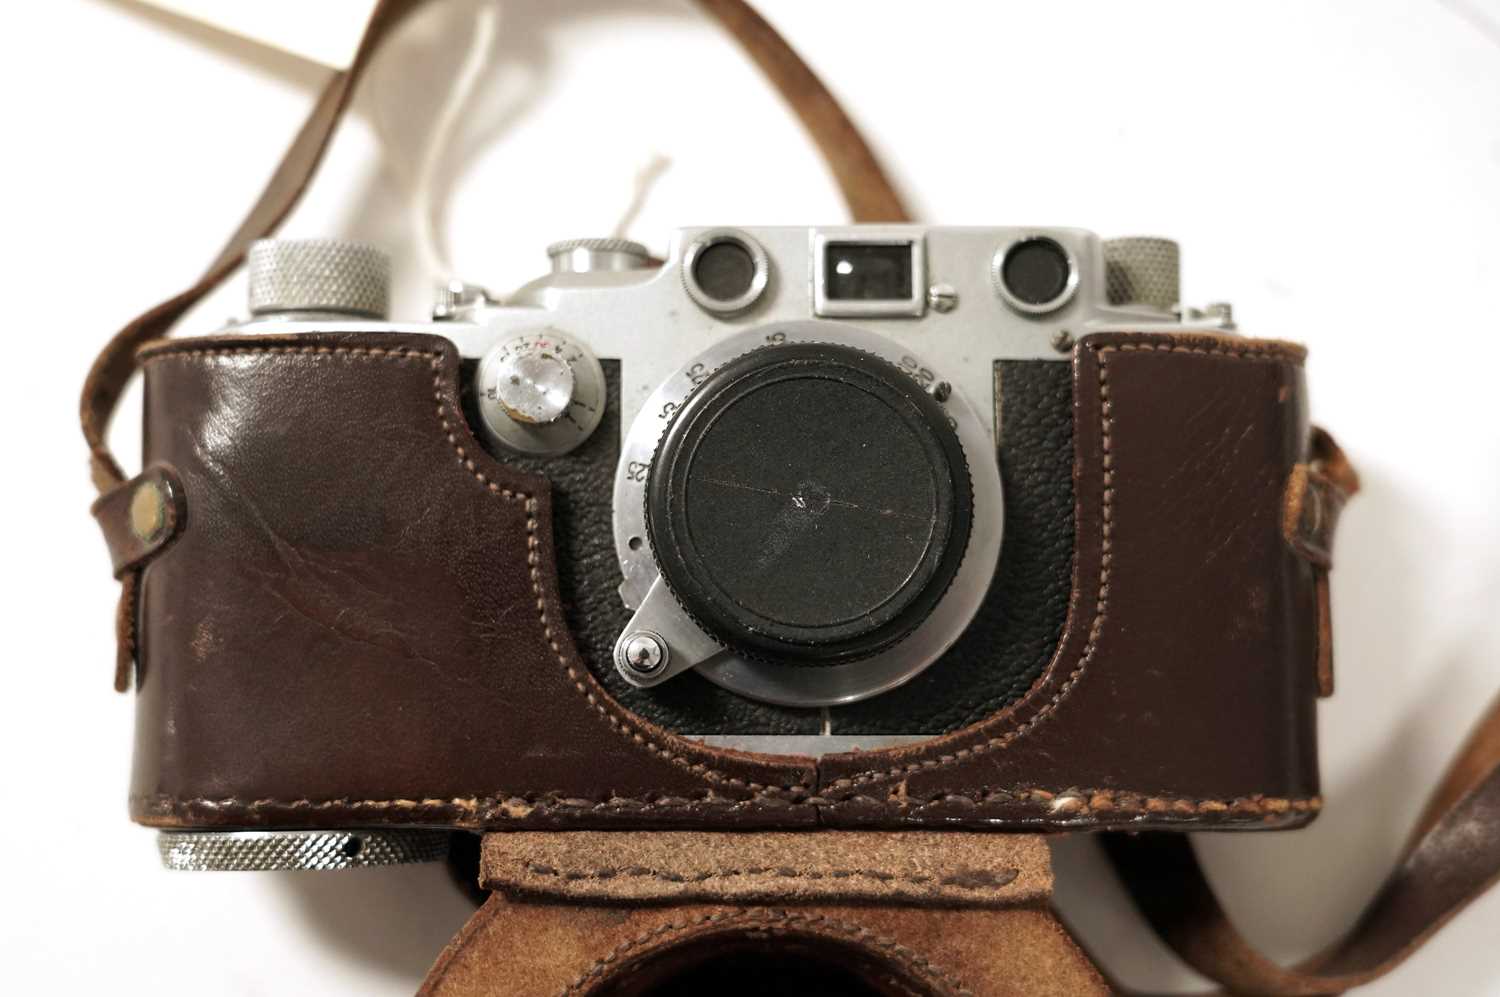 A Leica IIIc rangefinder camera, and other Leica/Leitz accessories - Image 2 of 6